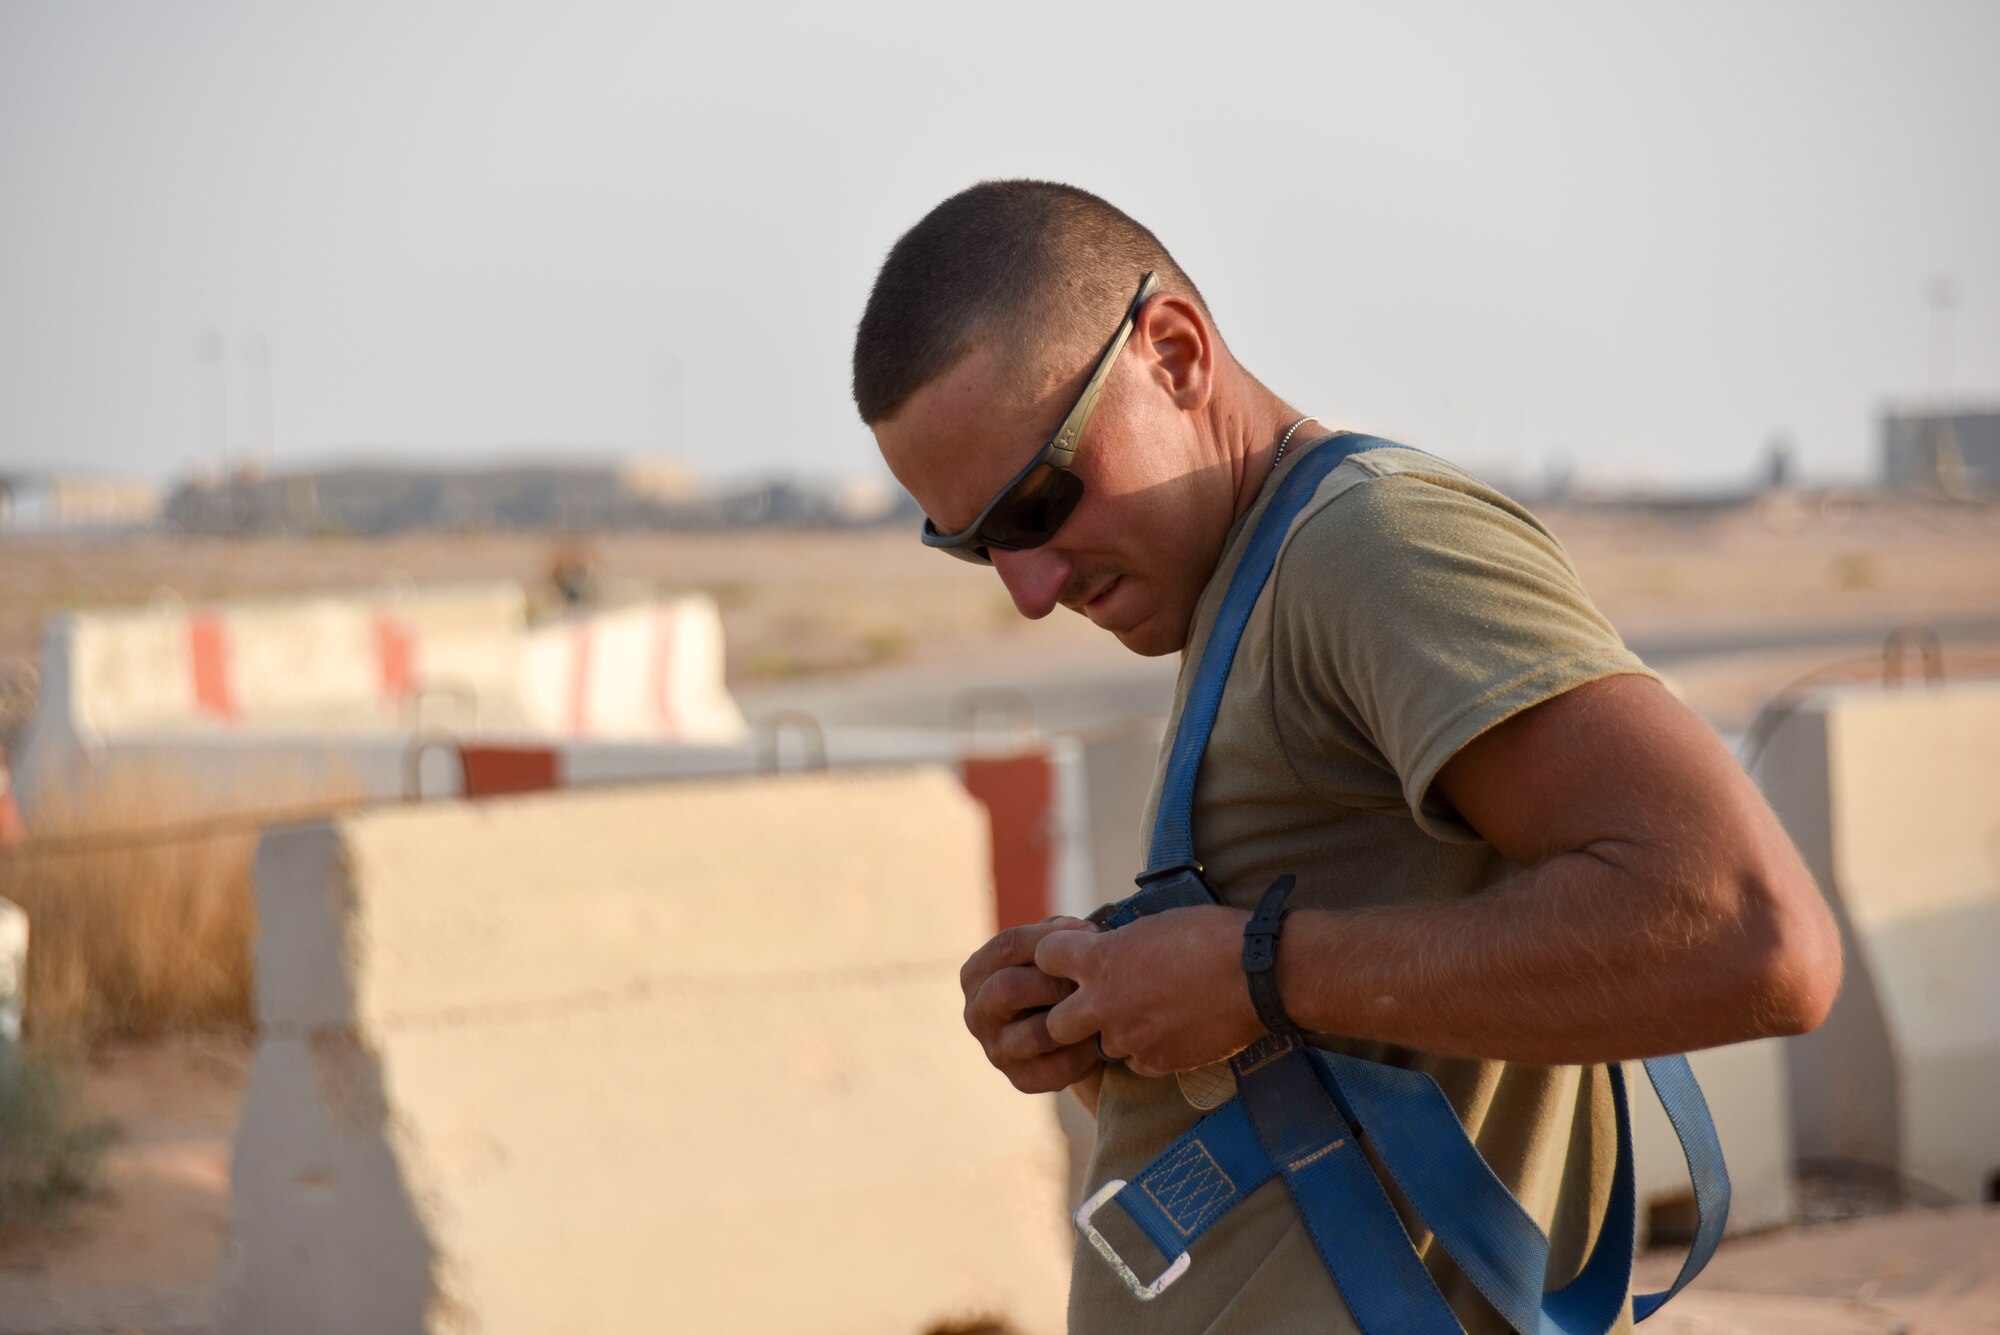 Staff Sgt. Tom Kennedy, 210th Engineering Installation Squadron cable and antenna systems specialist, puts on a safety harness prior to entering a cable access point at Prince Sultan Air Base, Saudi Arabia on Nov. 5, 2019.